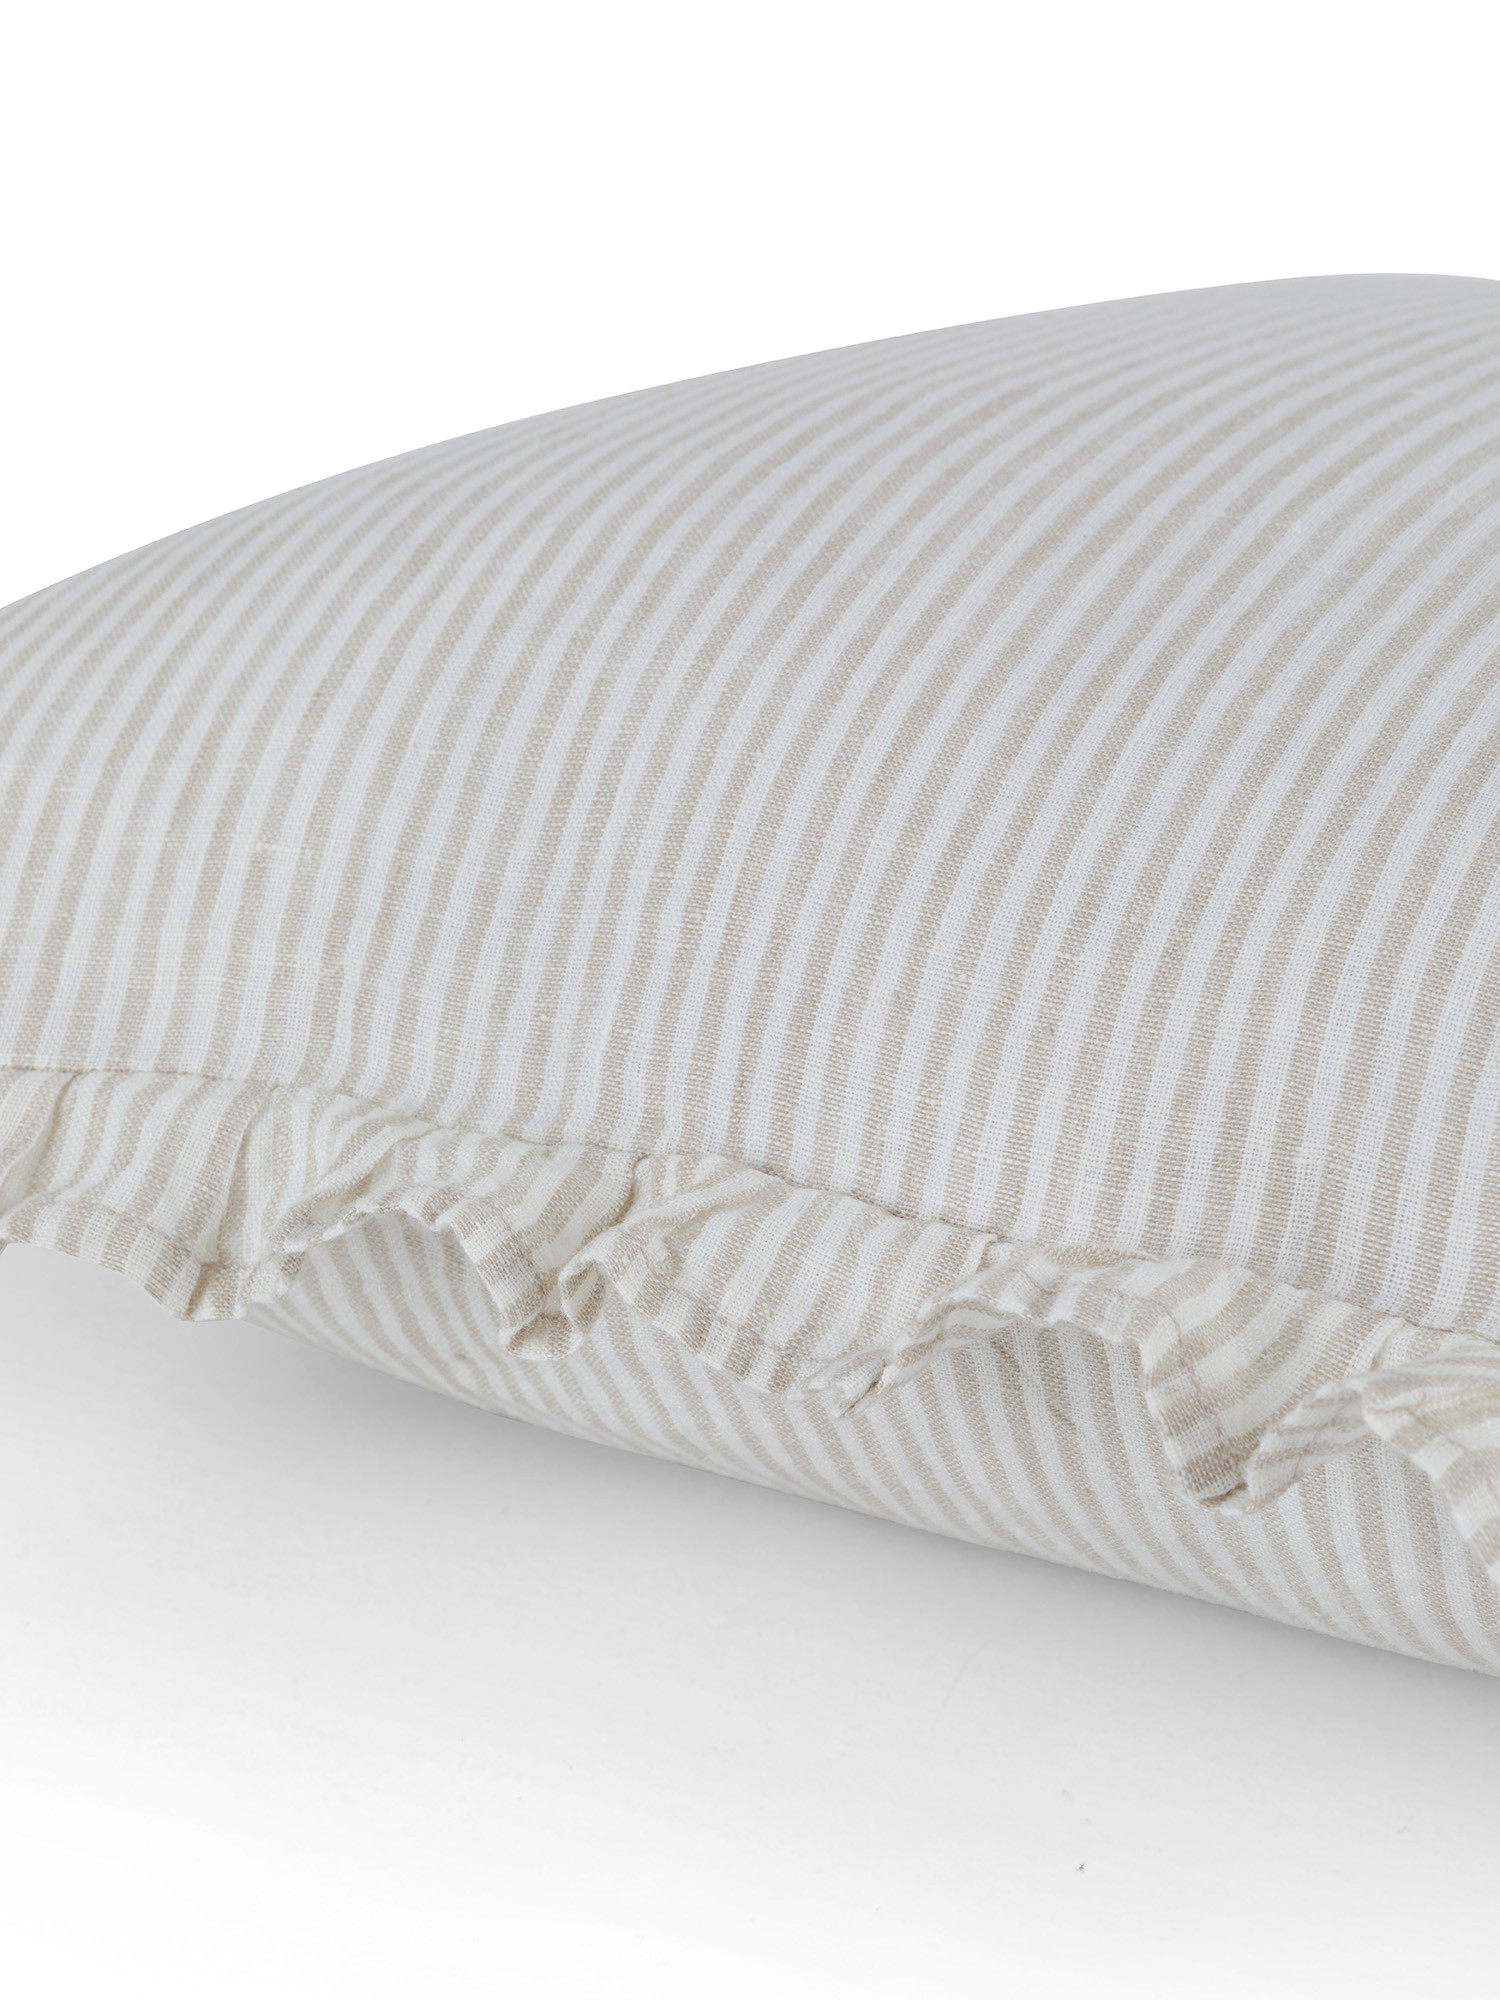 Striped cushion in pure linen 40x40 cm, Beige, large image number 2